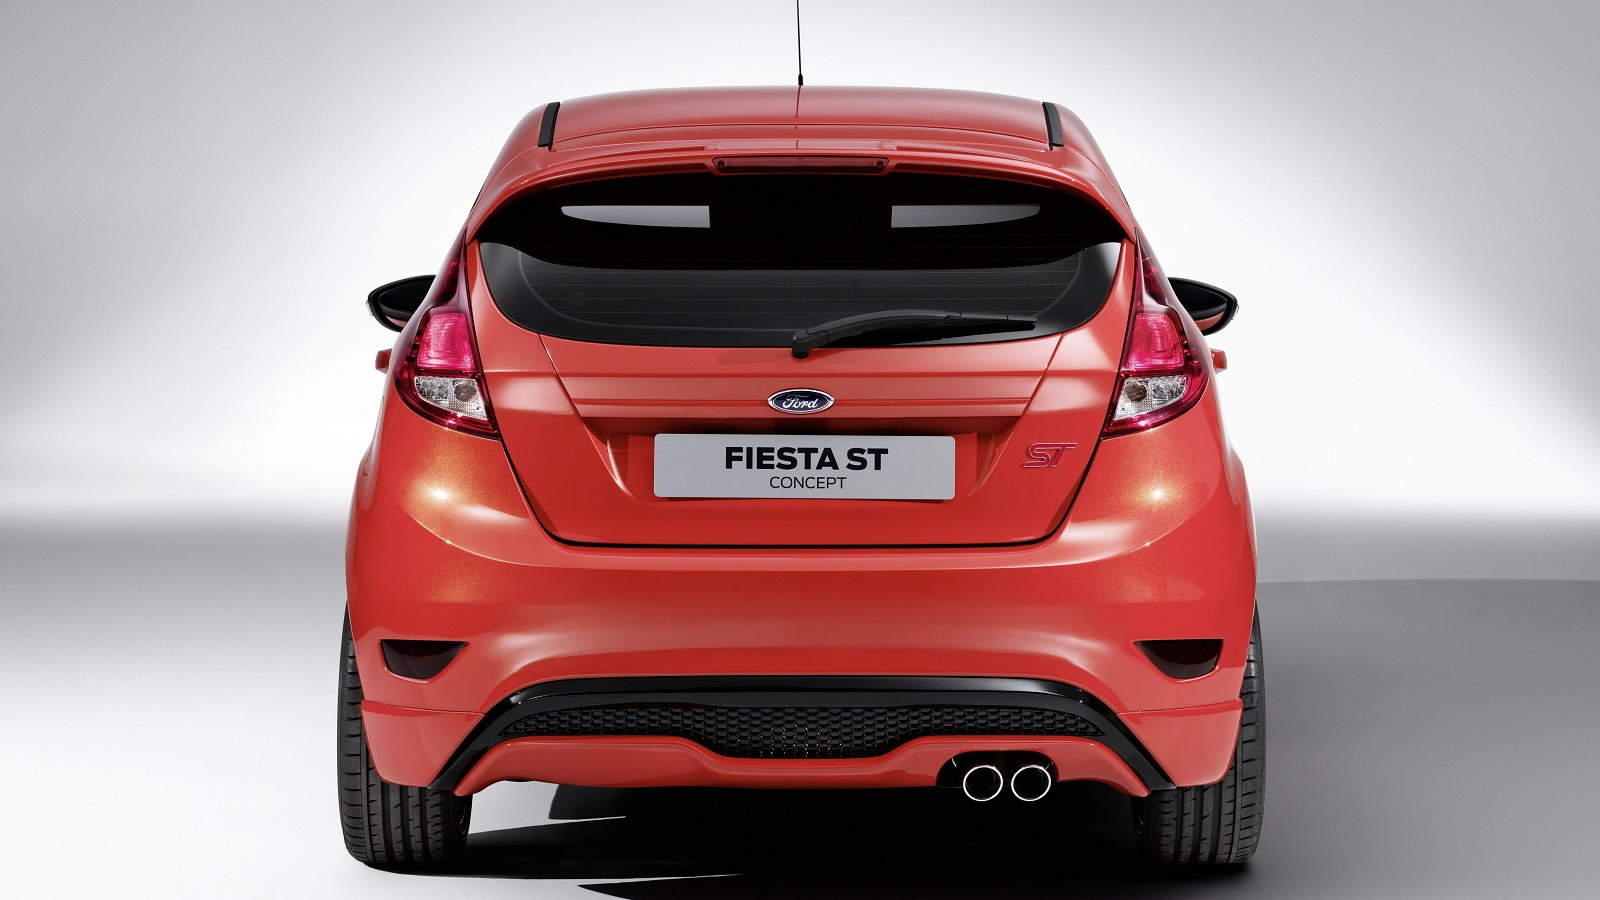 Ford Fiesta ST Concept, to be shown at 2011 Los Angeles Auto Show